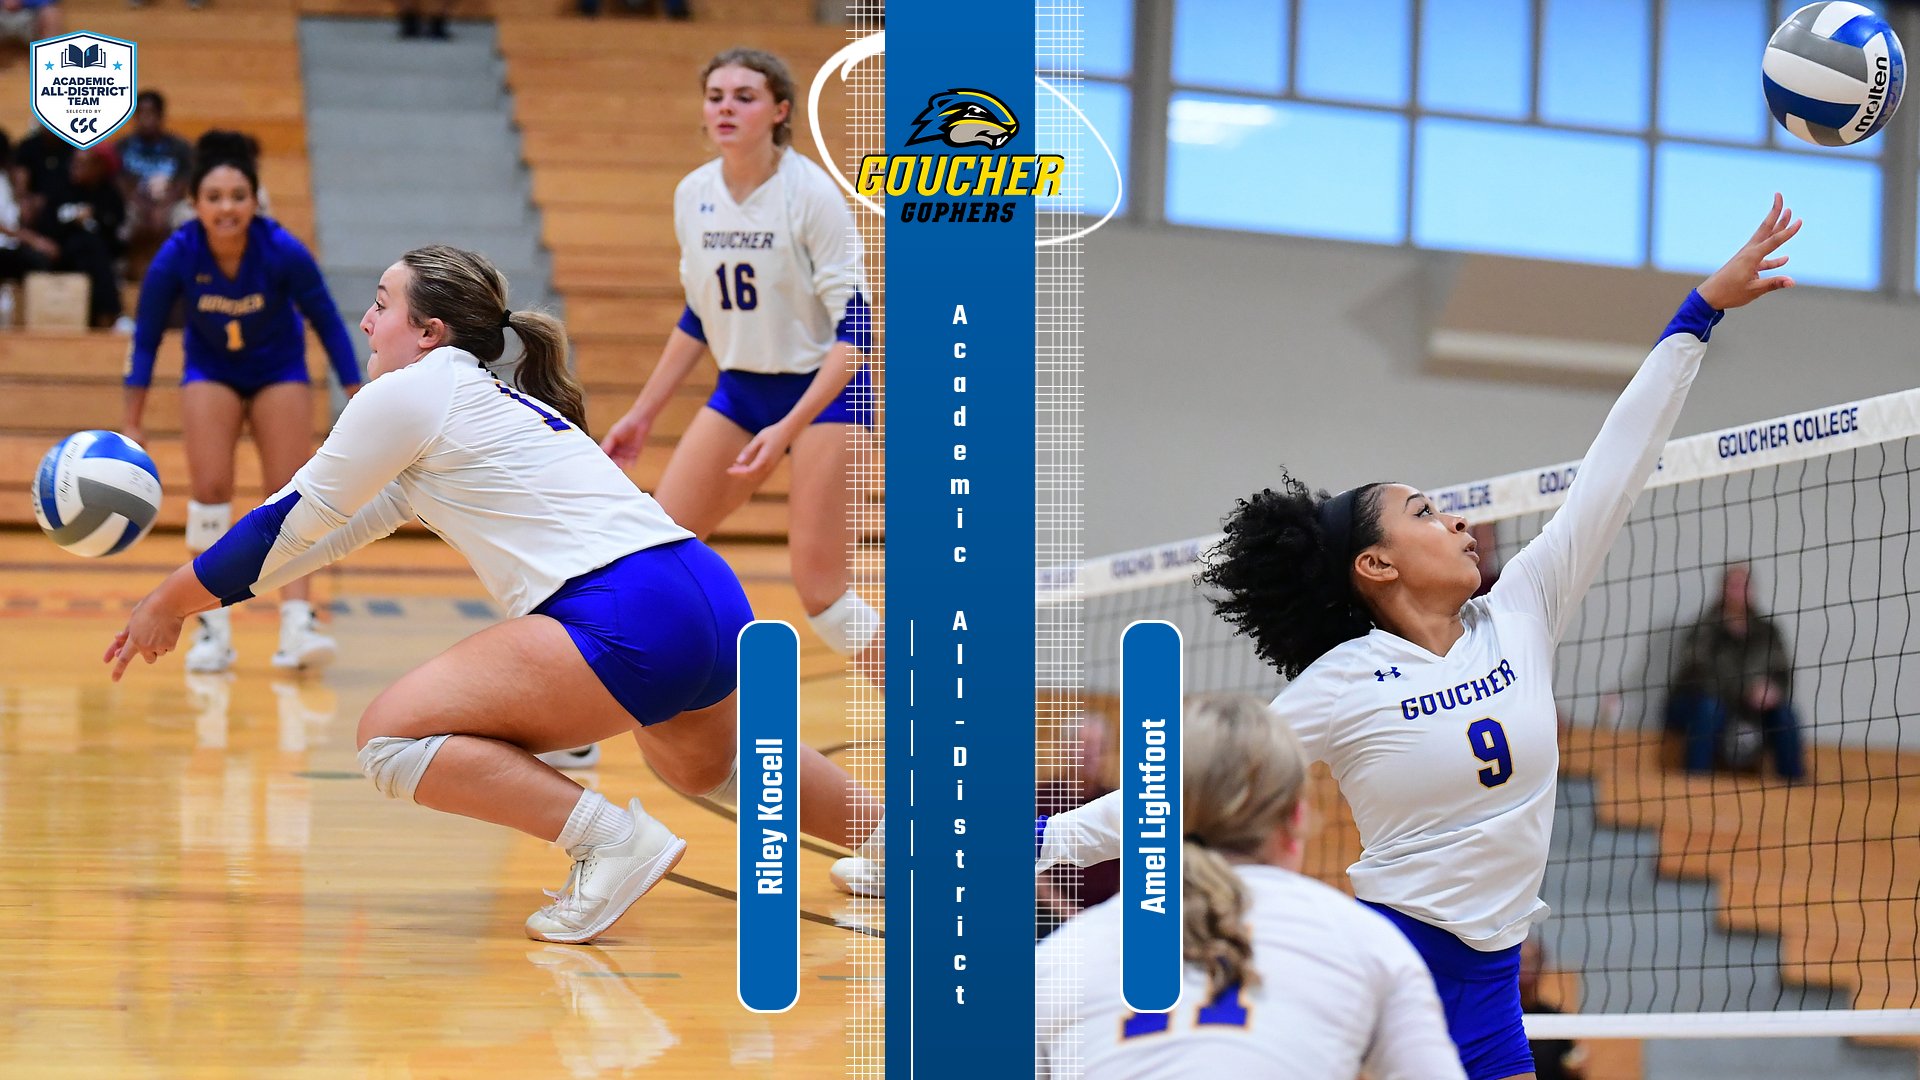 Riley Kocell, Amel Lightfoot Named to CSC Academic All-District Volleyball Team